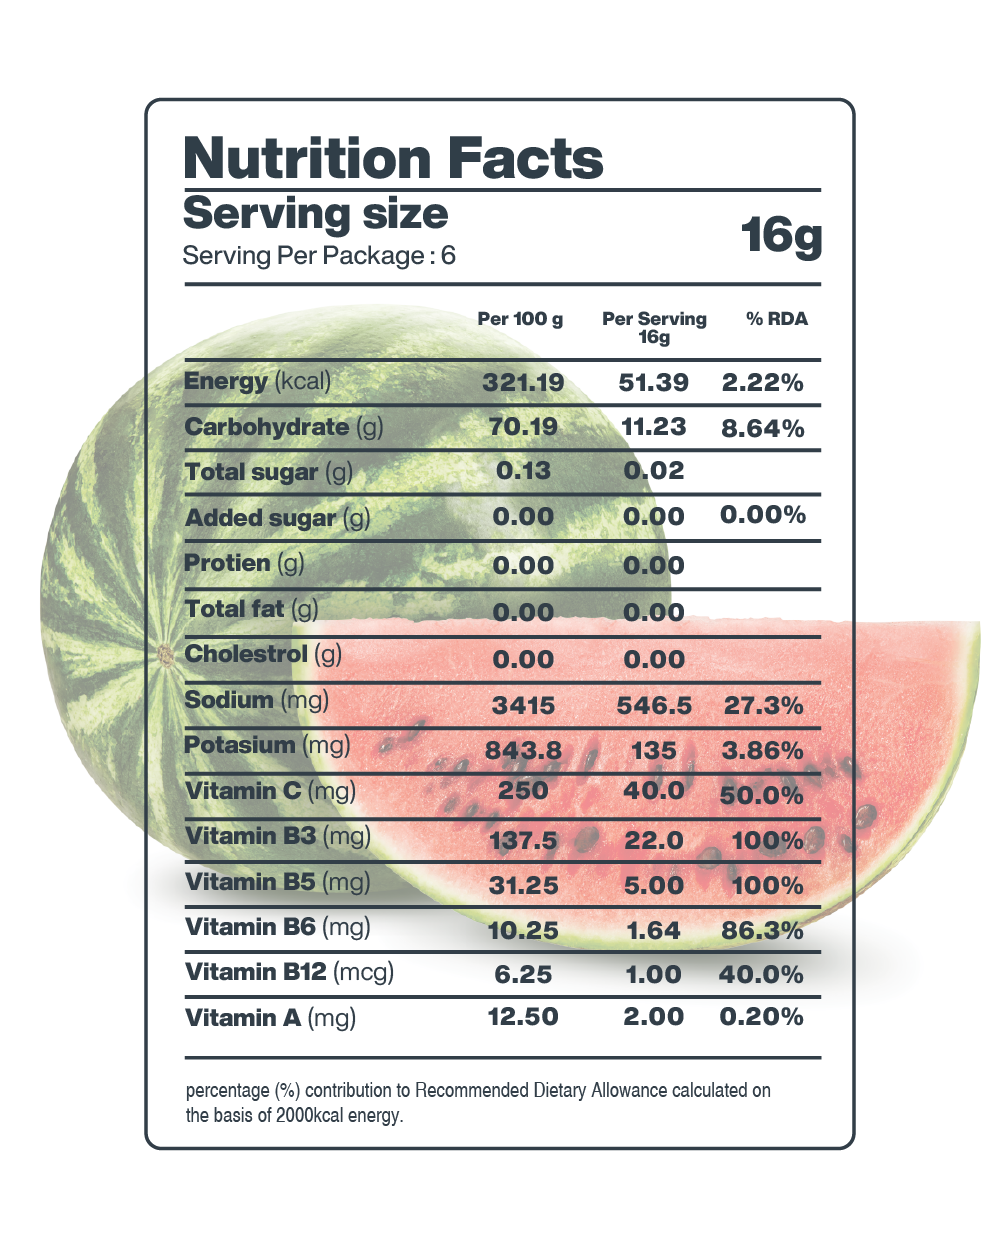 Moon Watermelon Lunar Hydration Booster nutrition facts label for SEO optimization by MOONFREEZE FOODS PRIVATE LIMITED.